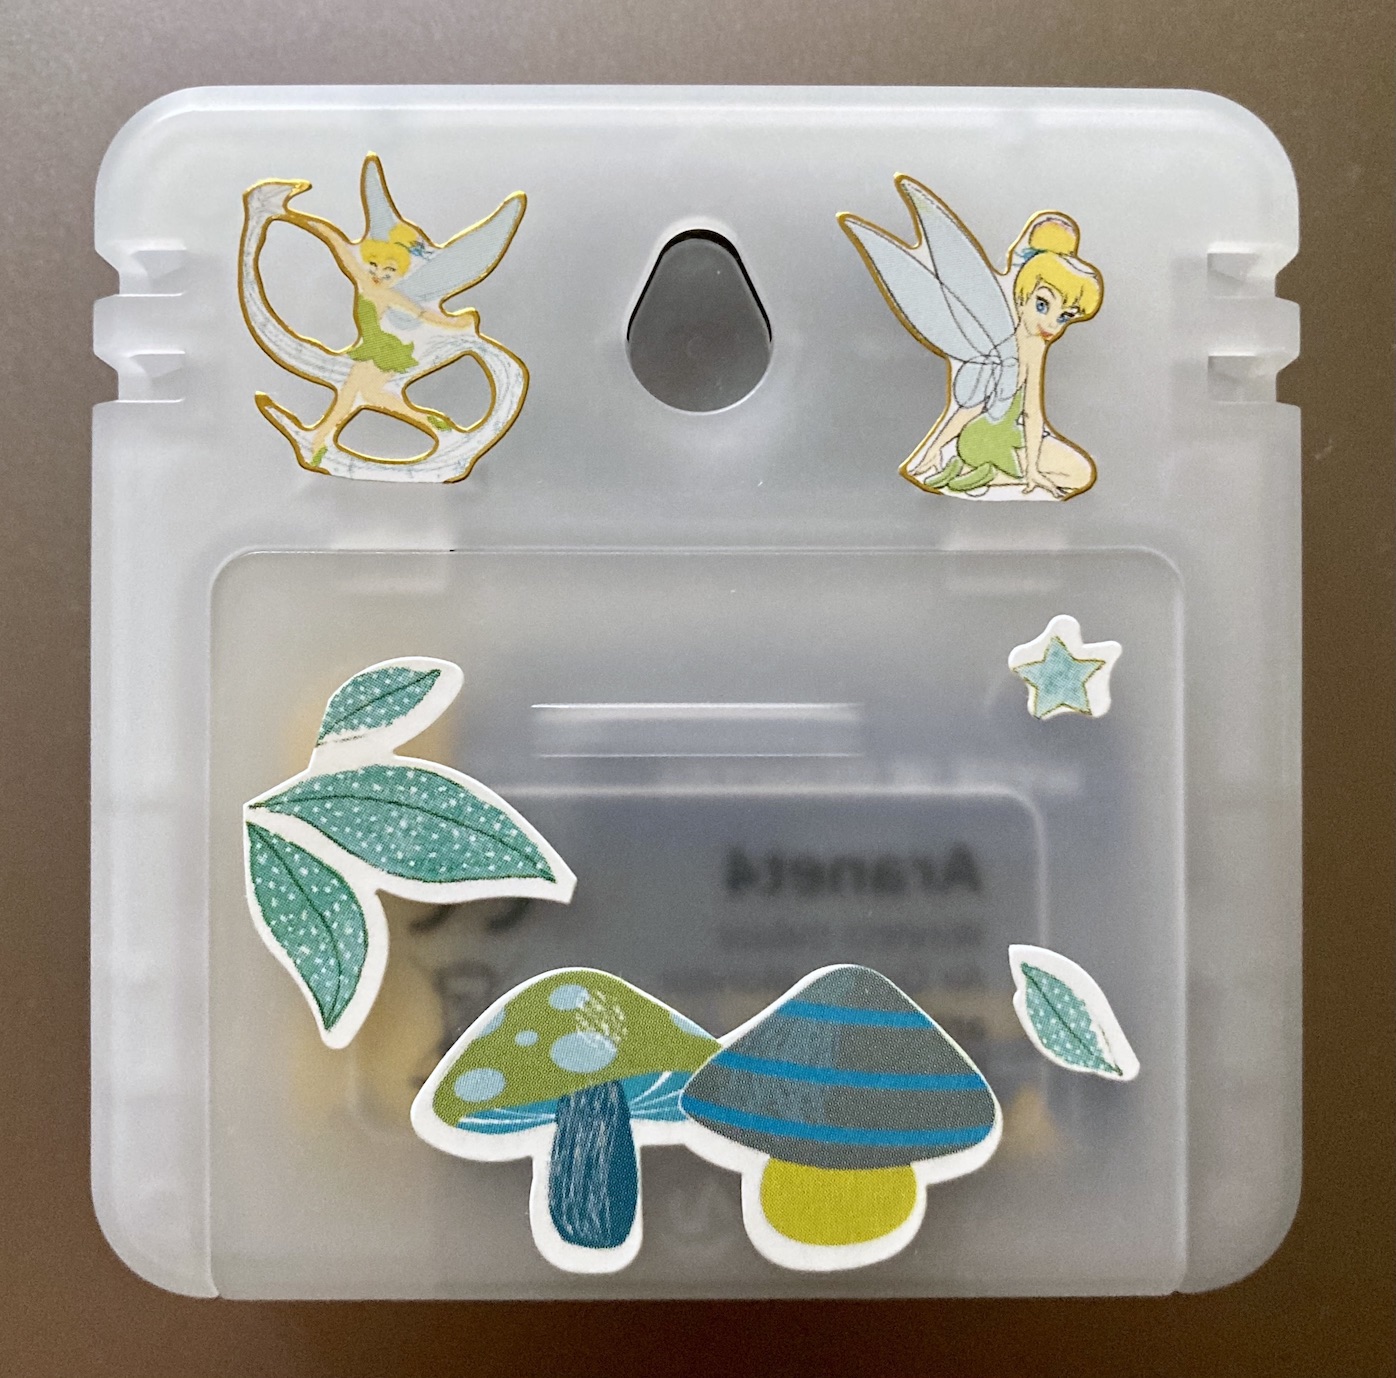 The back side of an Aranet4 device. The available space between the sensors and battery nook opening has been decorated with small stickers depicting Tinkerbell as well as various leaves and mushrooms.